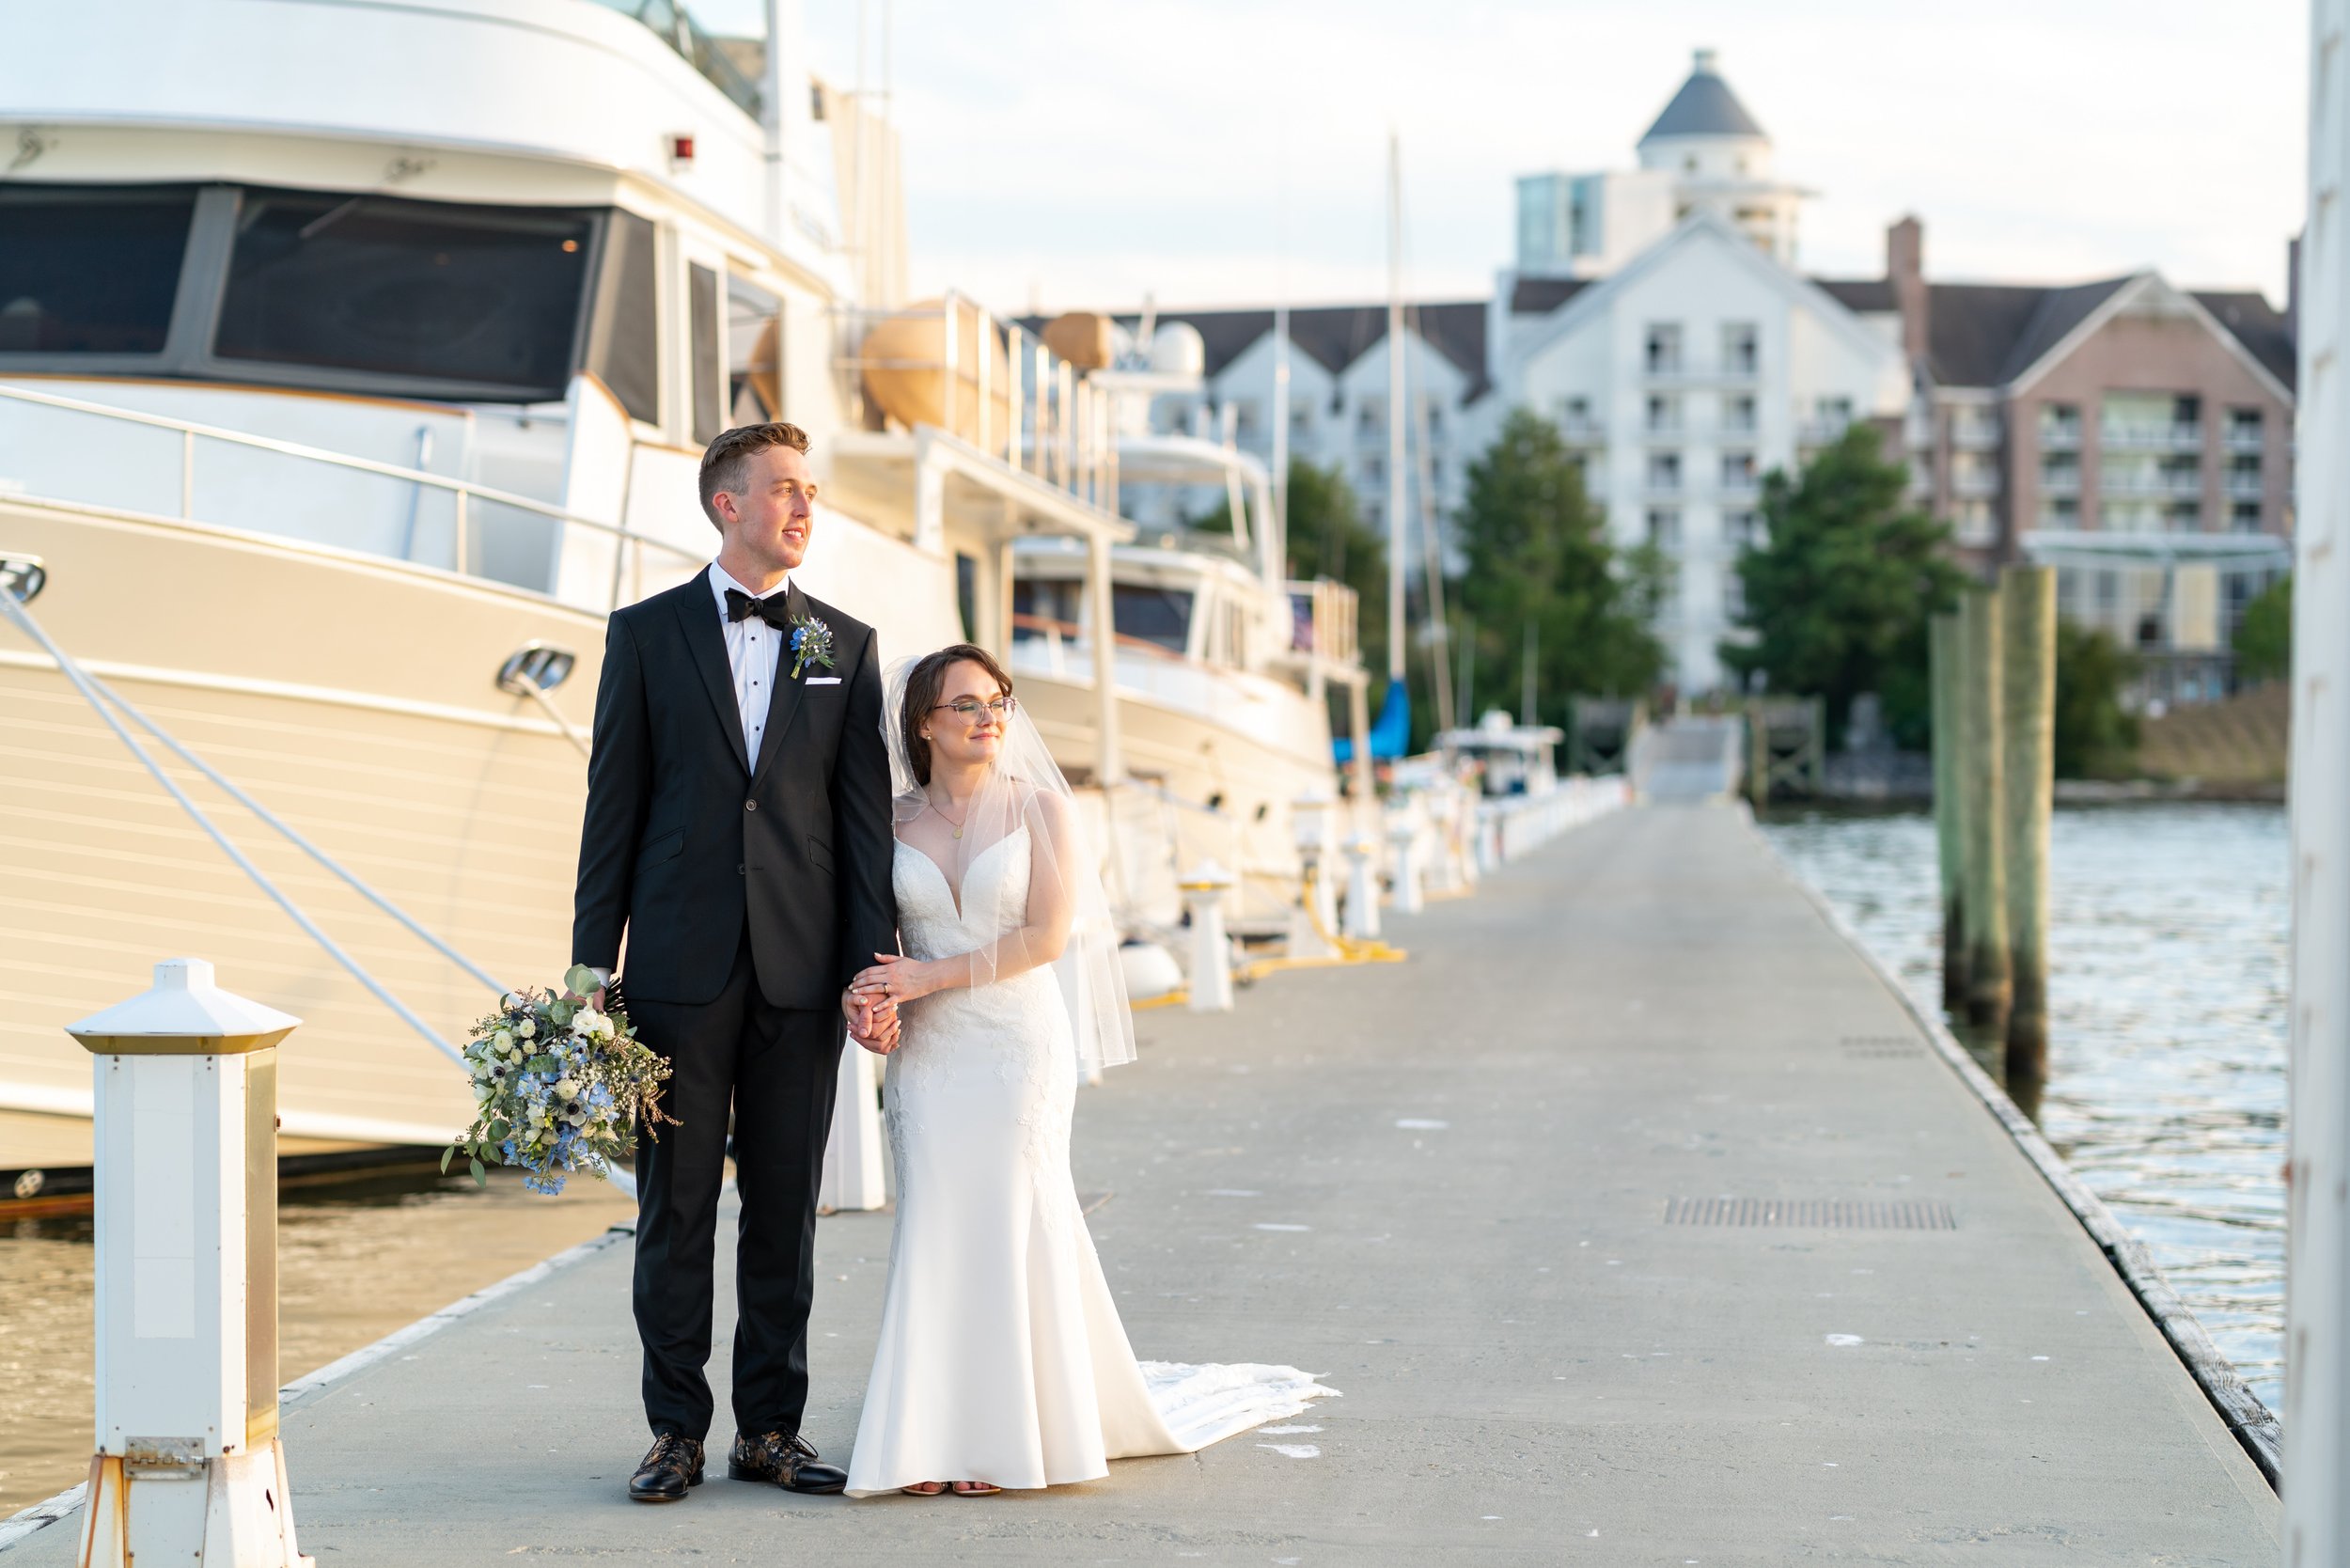 Romantic sunset bride and groom wedding portraits on the water in Annapolis md